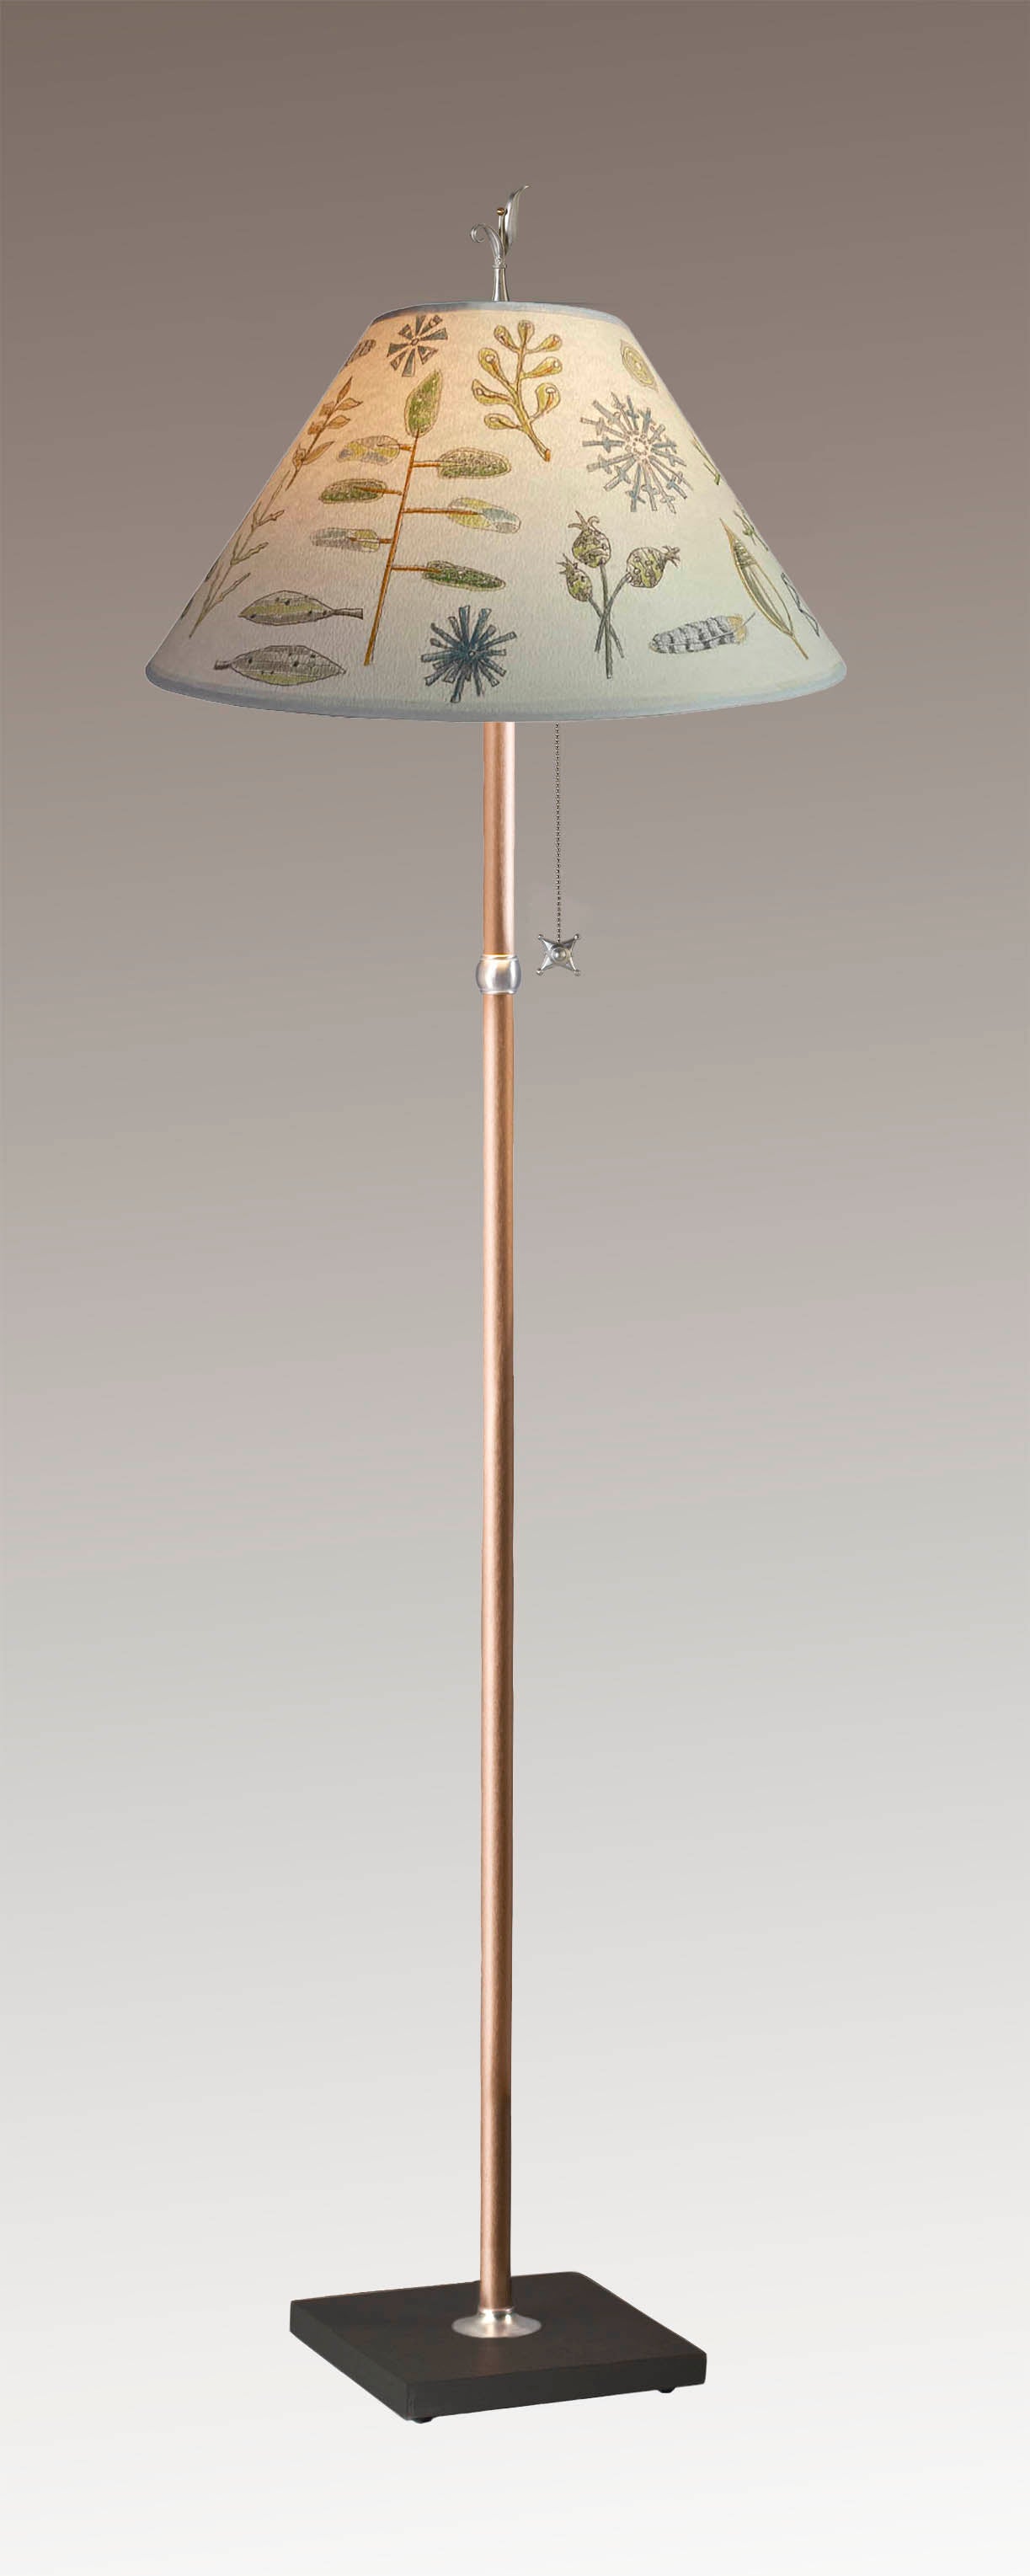 Janna Ugone & Co Floor Lamp Copper Floor Lamp with Large Conical Shade in Field Chart